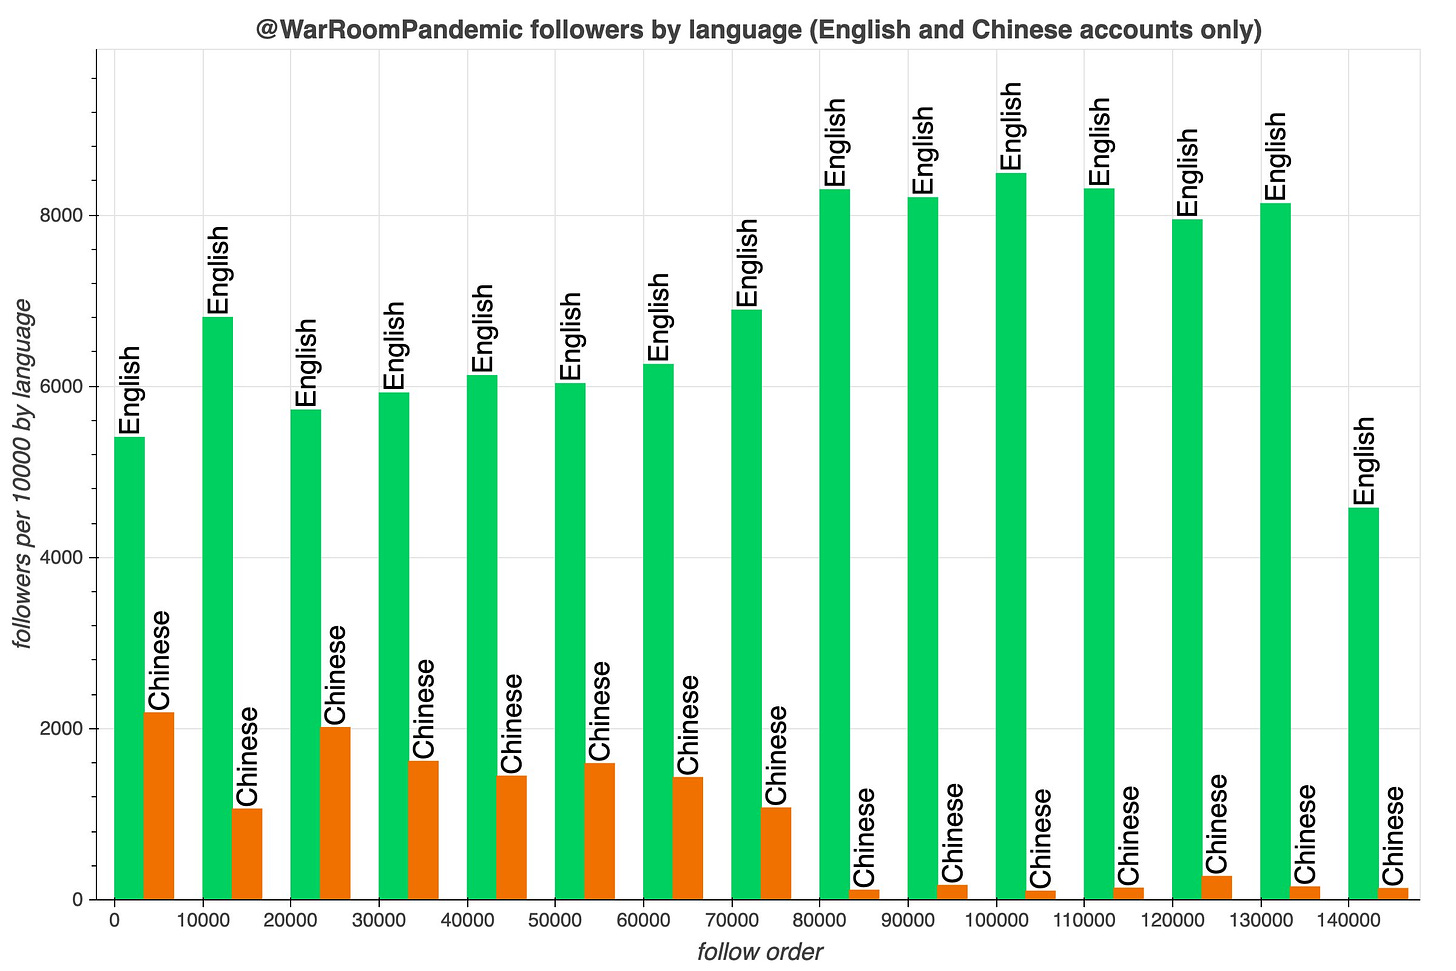 bar chart showing the proportion of each 10K @WarRoomPandemic followers that tweet in English vs Chinese